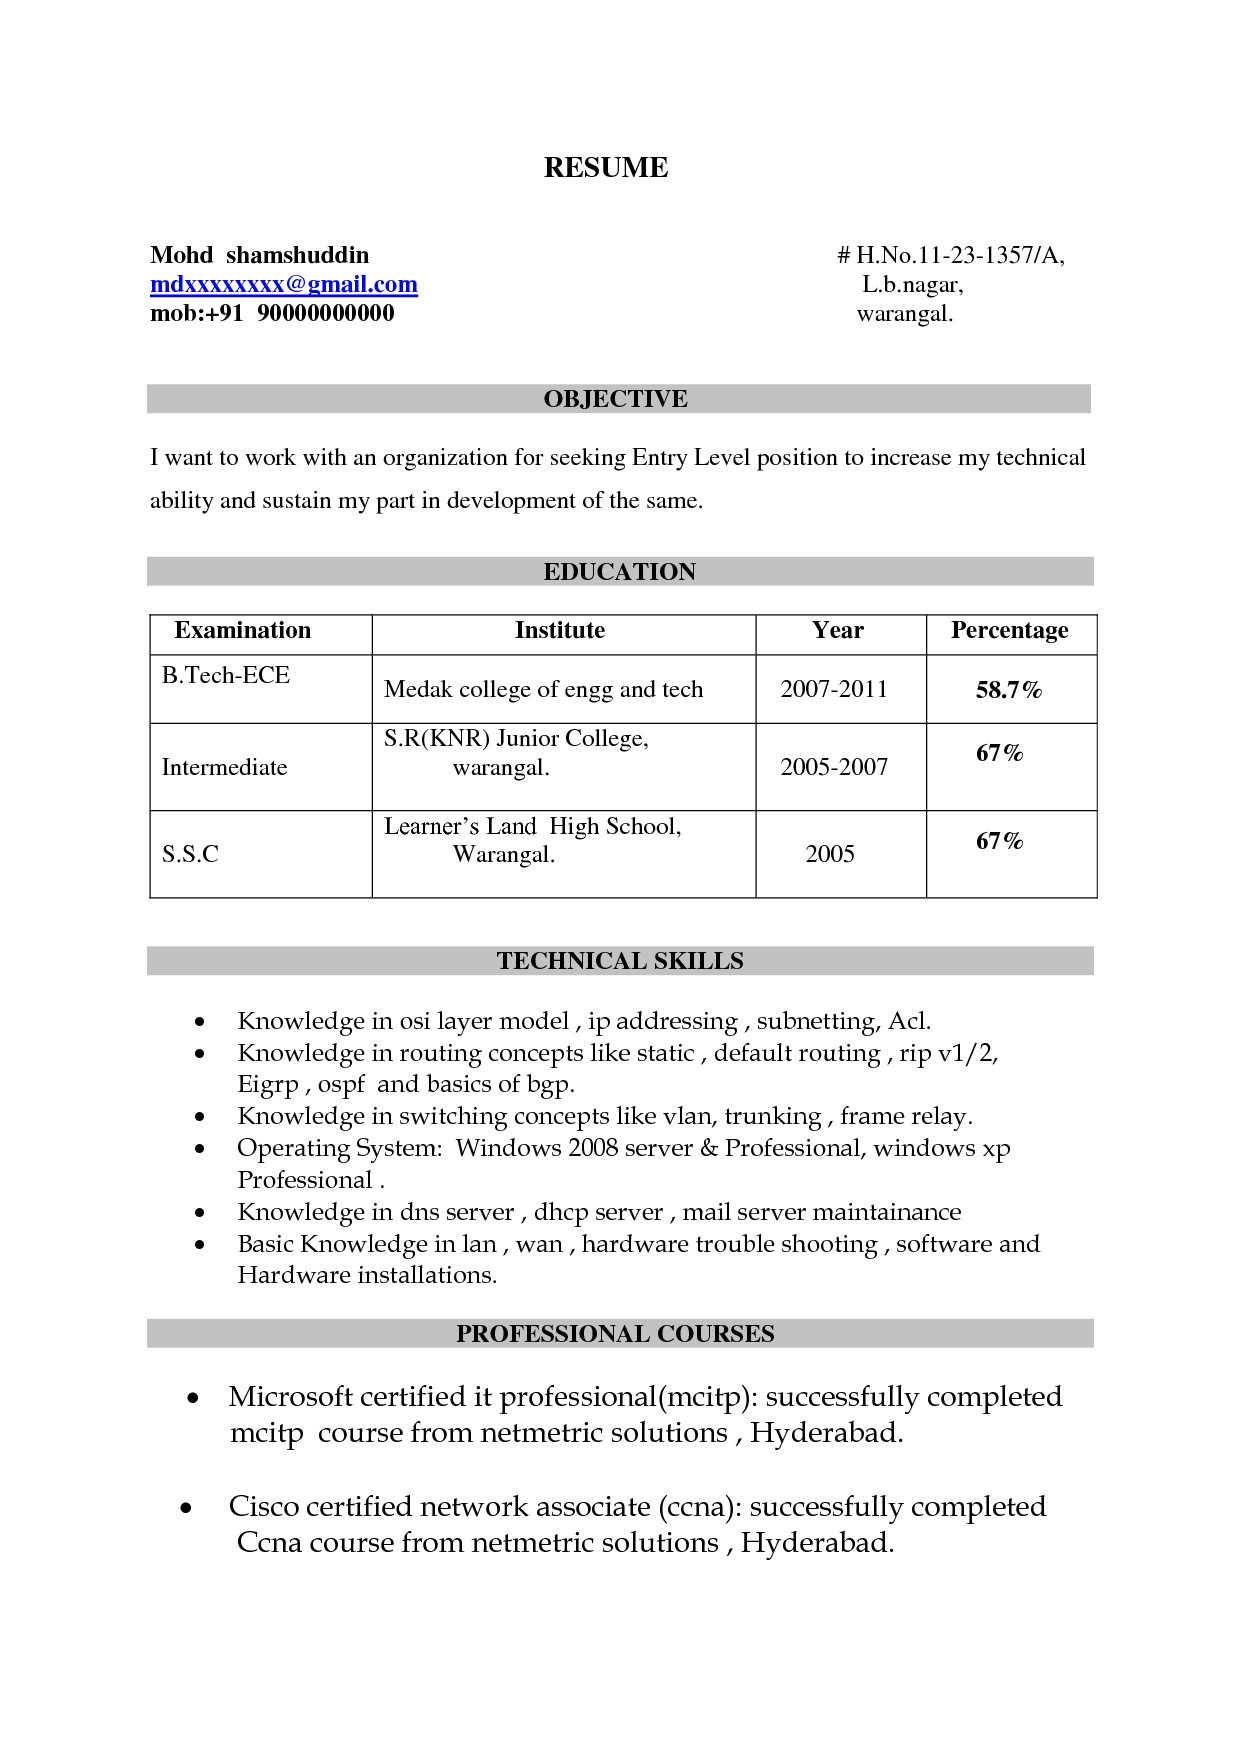 ccnp resume sample for freshers